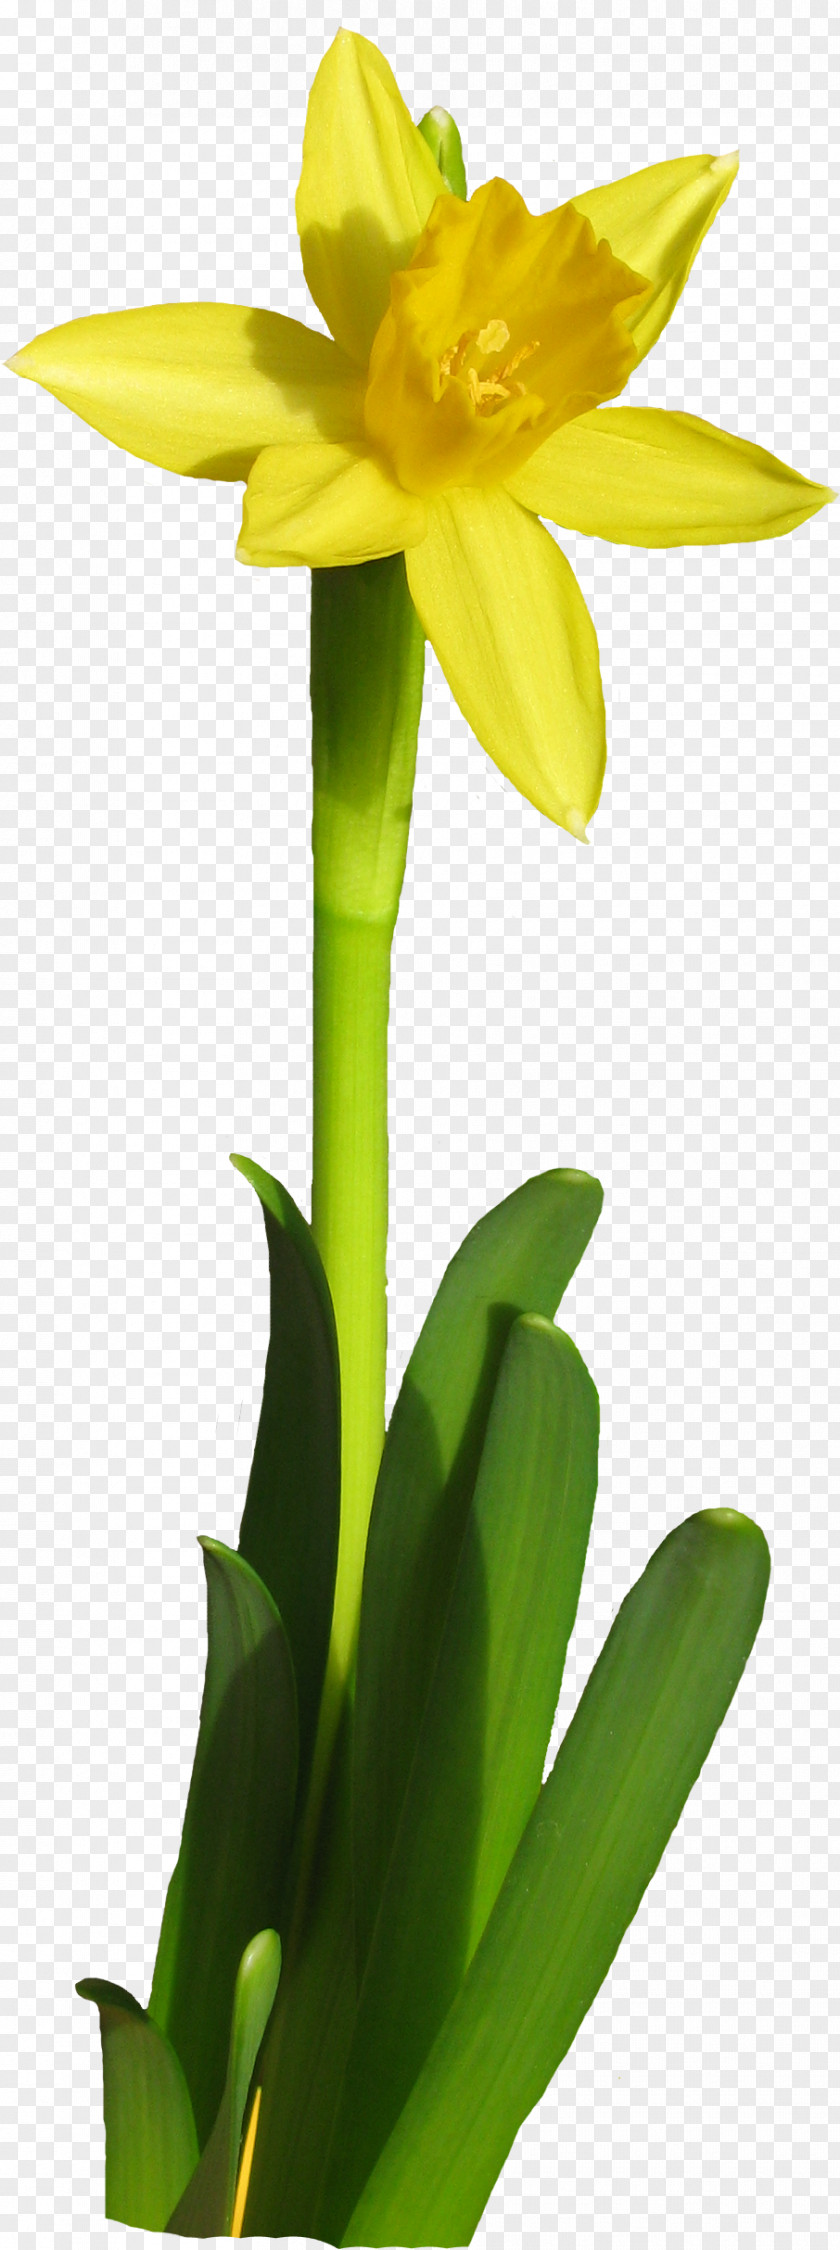 Flower Daffodil Tulip Floristry PNG